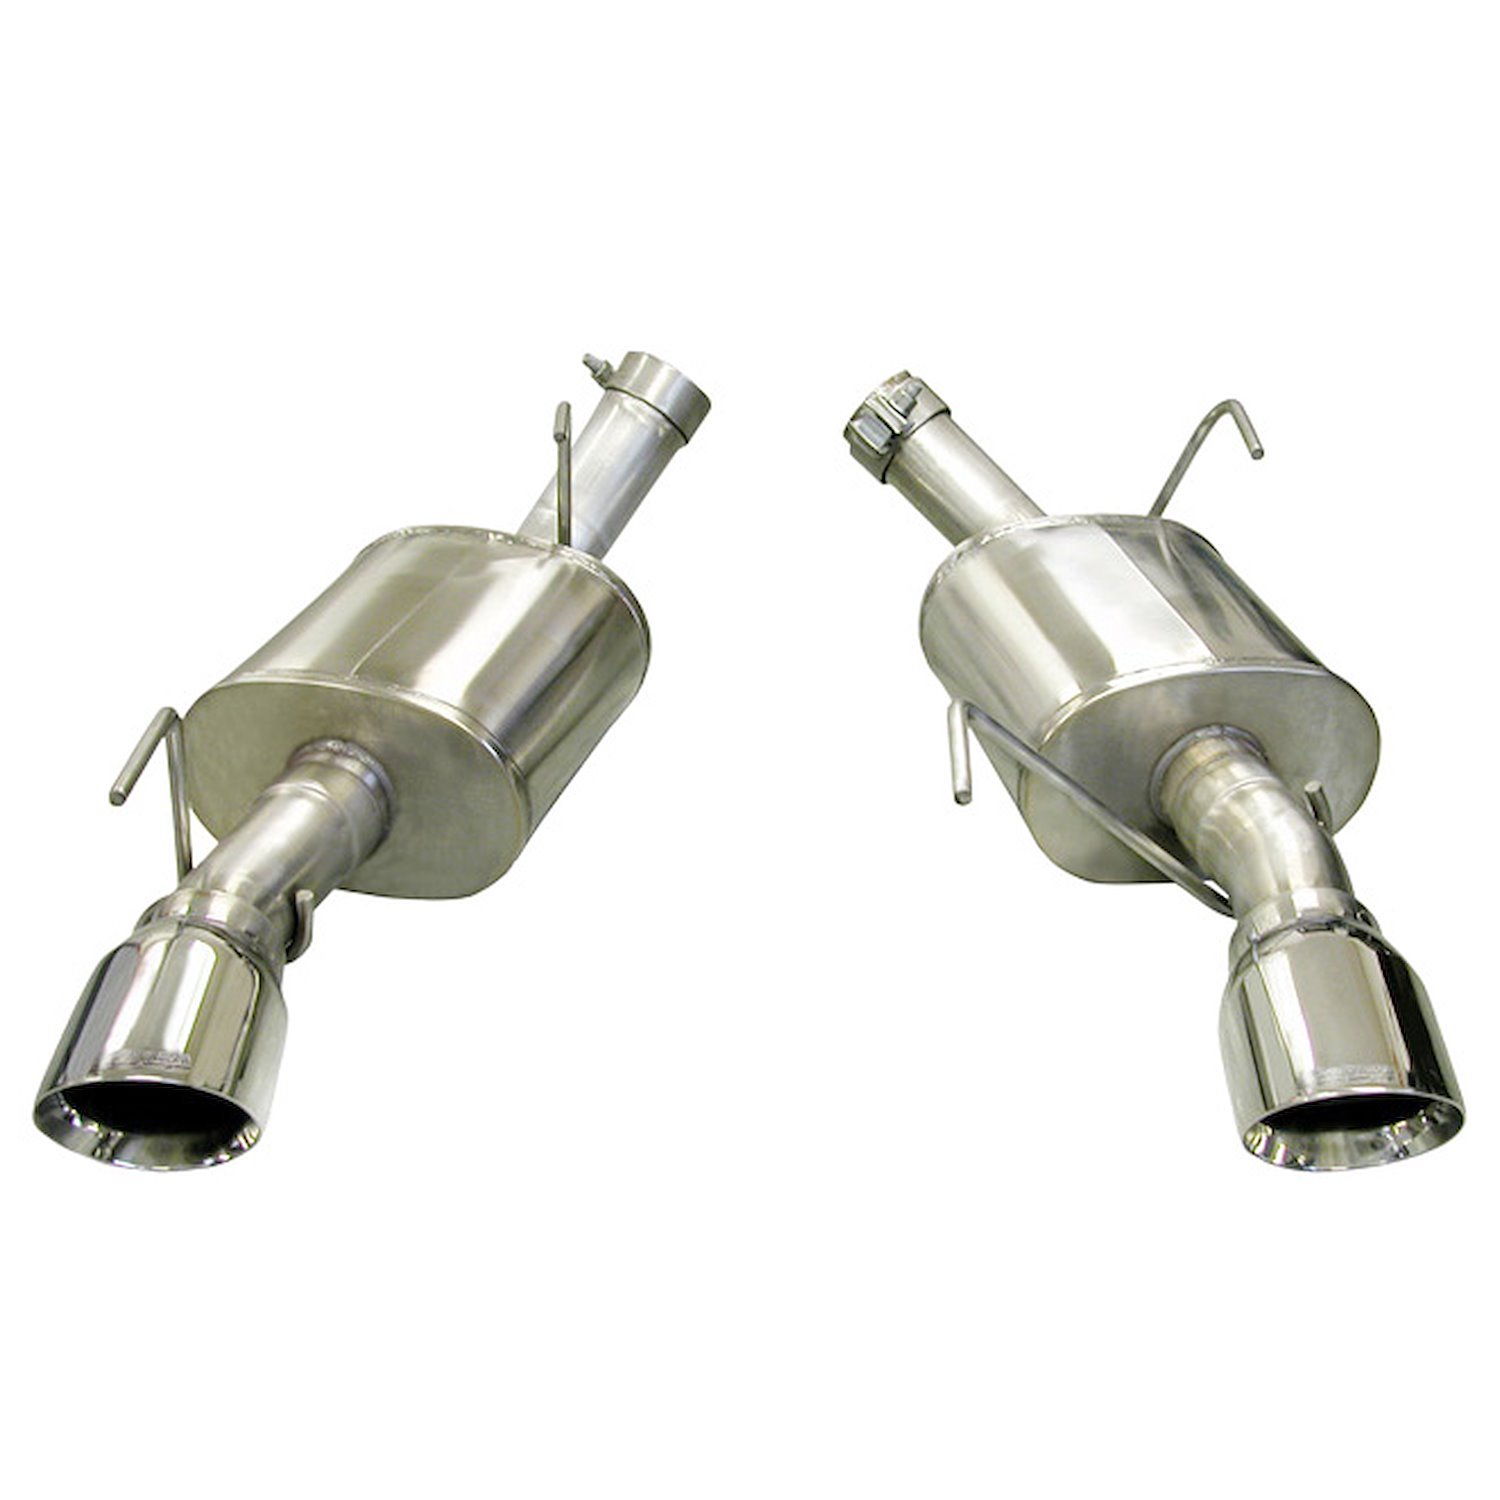 Xtreme Axle-Back Exhaust System 2005-2010 Ford Mustang GT 4.6L & Shelby GT500 5.4L